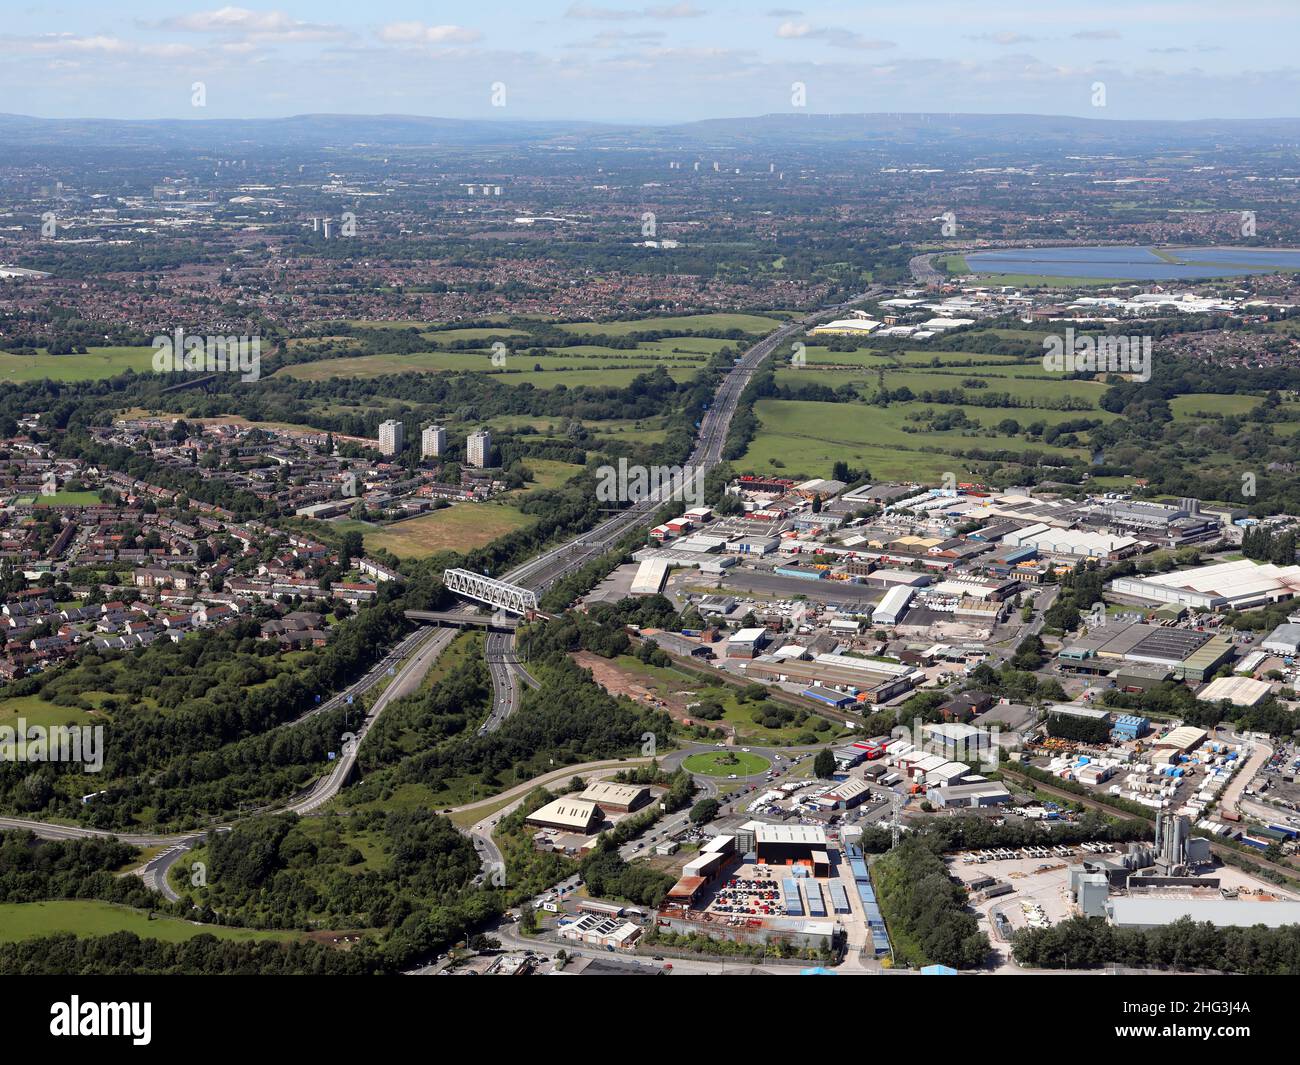 aerial view of Bredbury, Manchester looking North up the M60 motorway Stock Photo